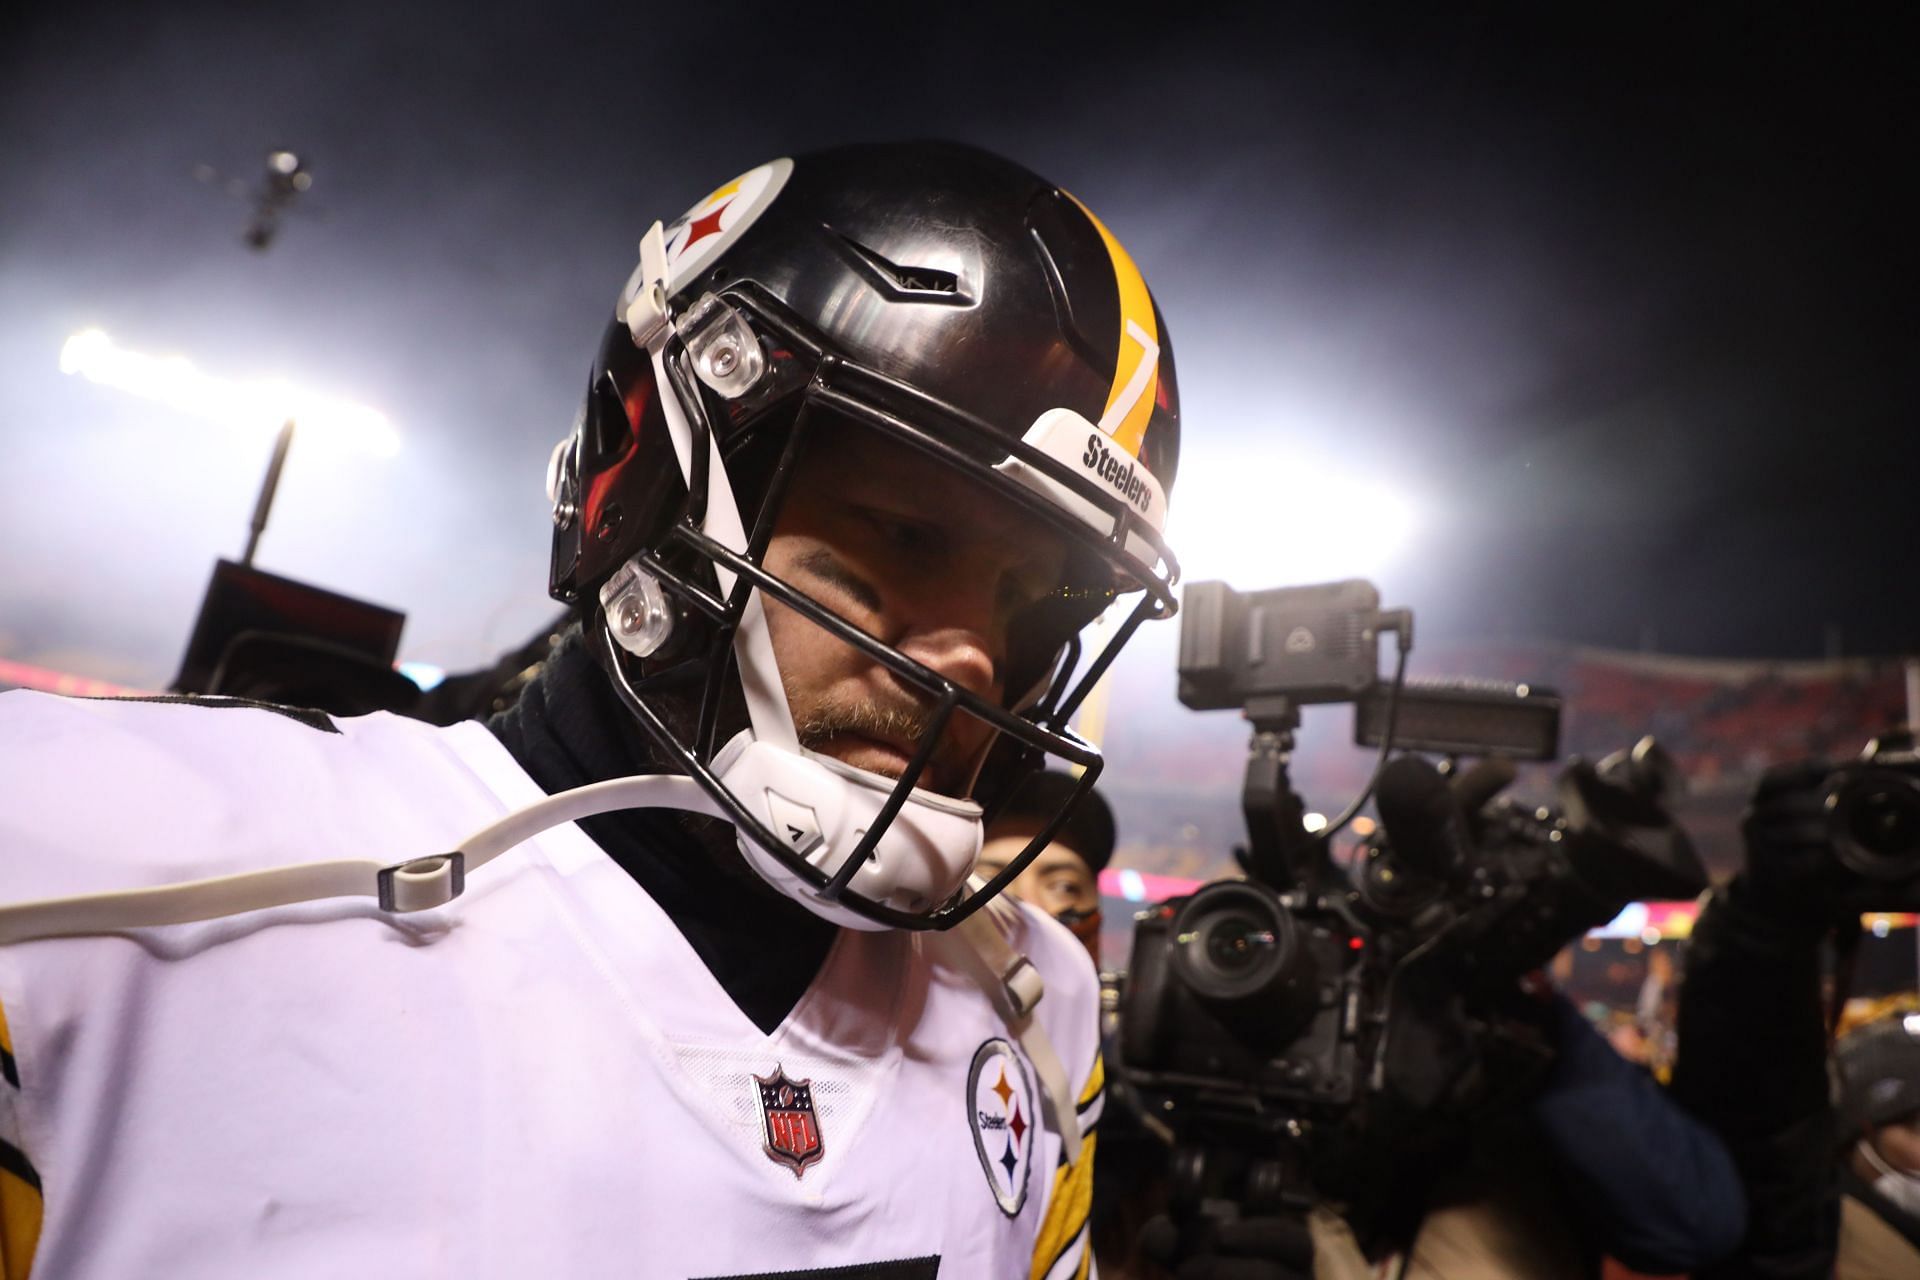 Pittsburgh Steelers legend Ben Roethlisberger recently ruffled some feathers with his comments